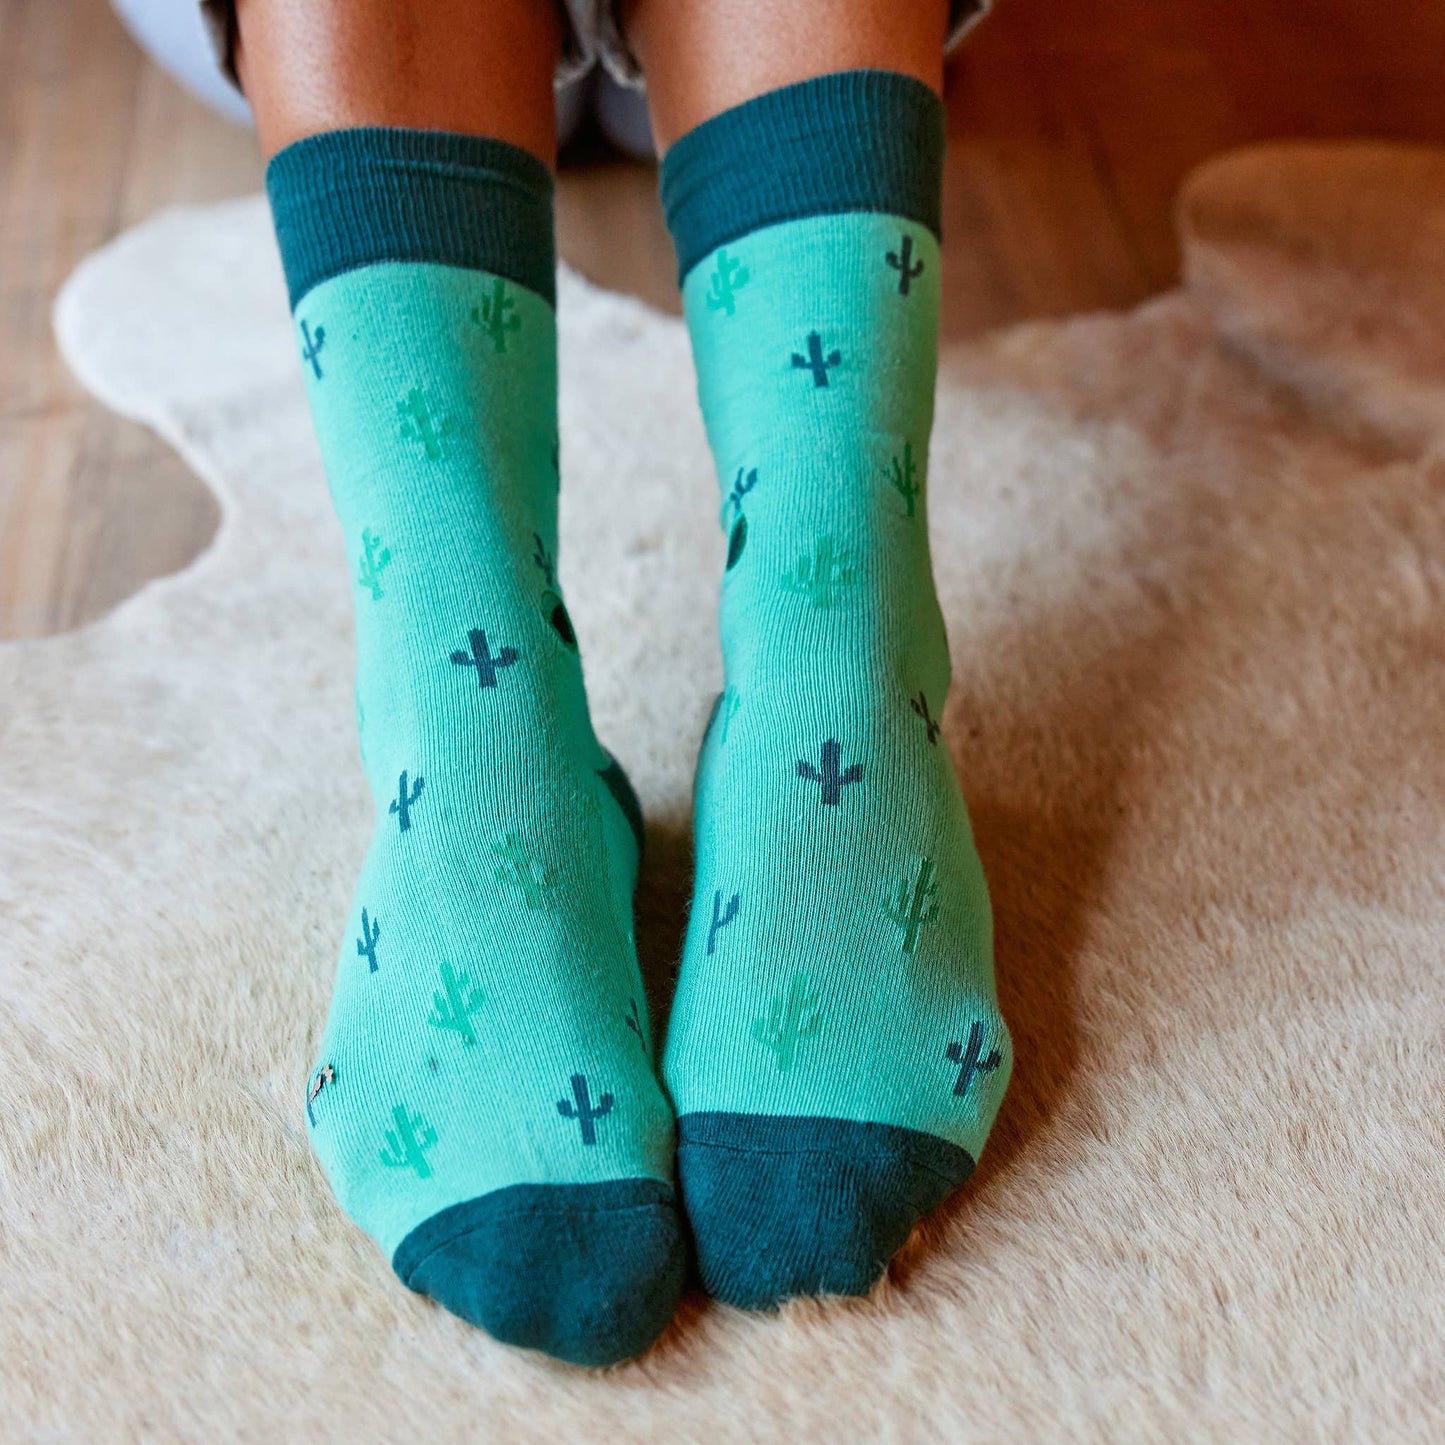 Socks that Protect Tropical Rainforests (Green Cacti): Small